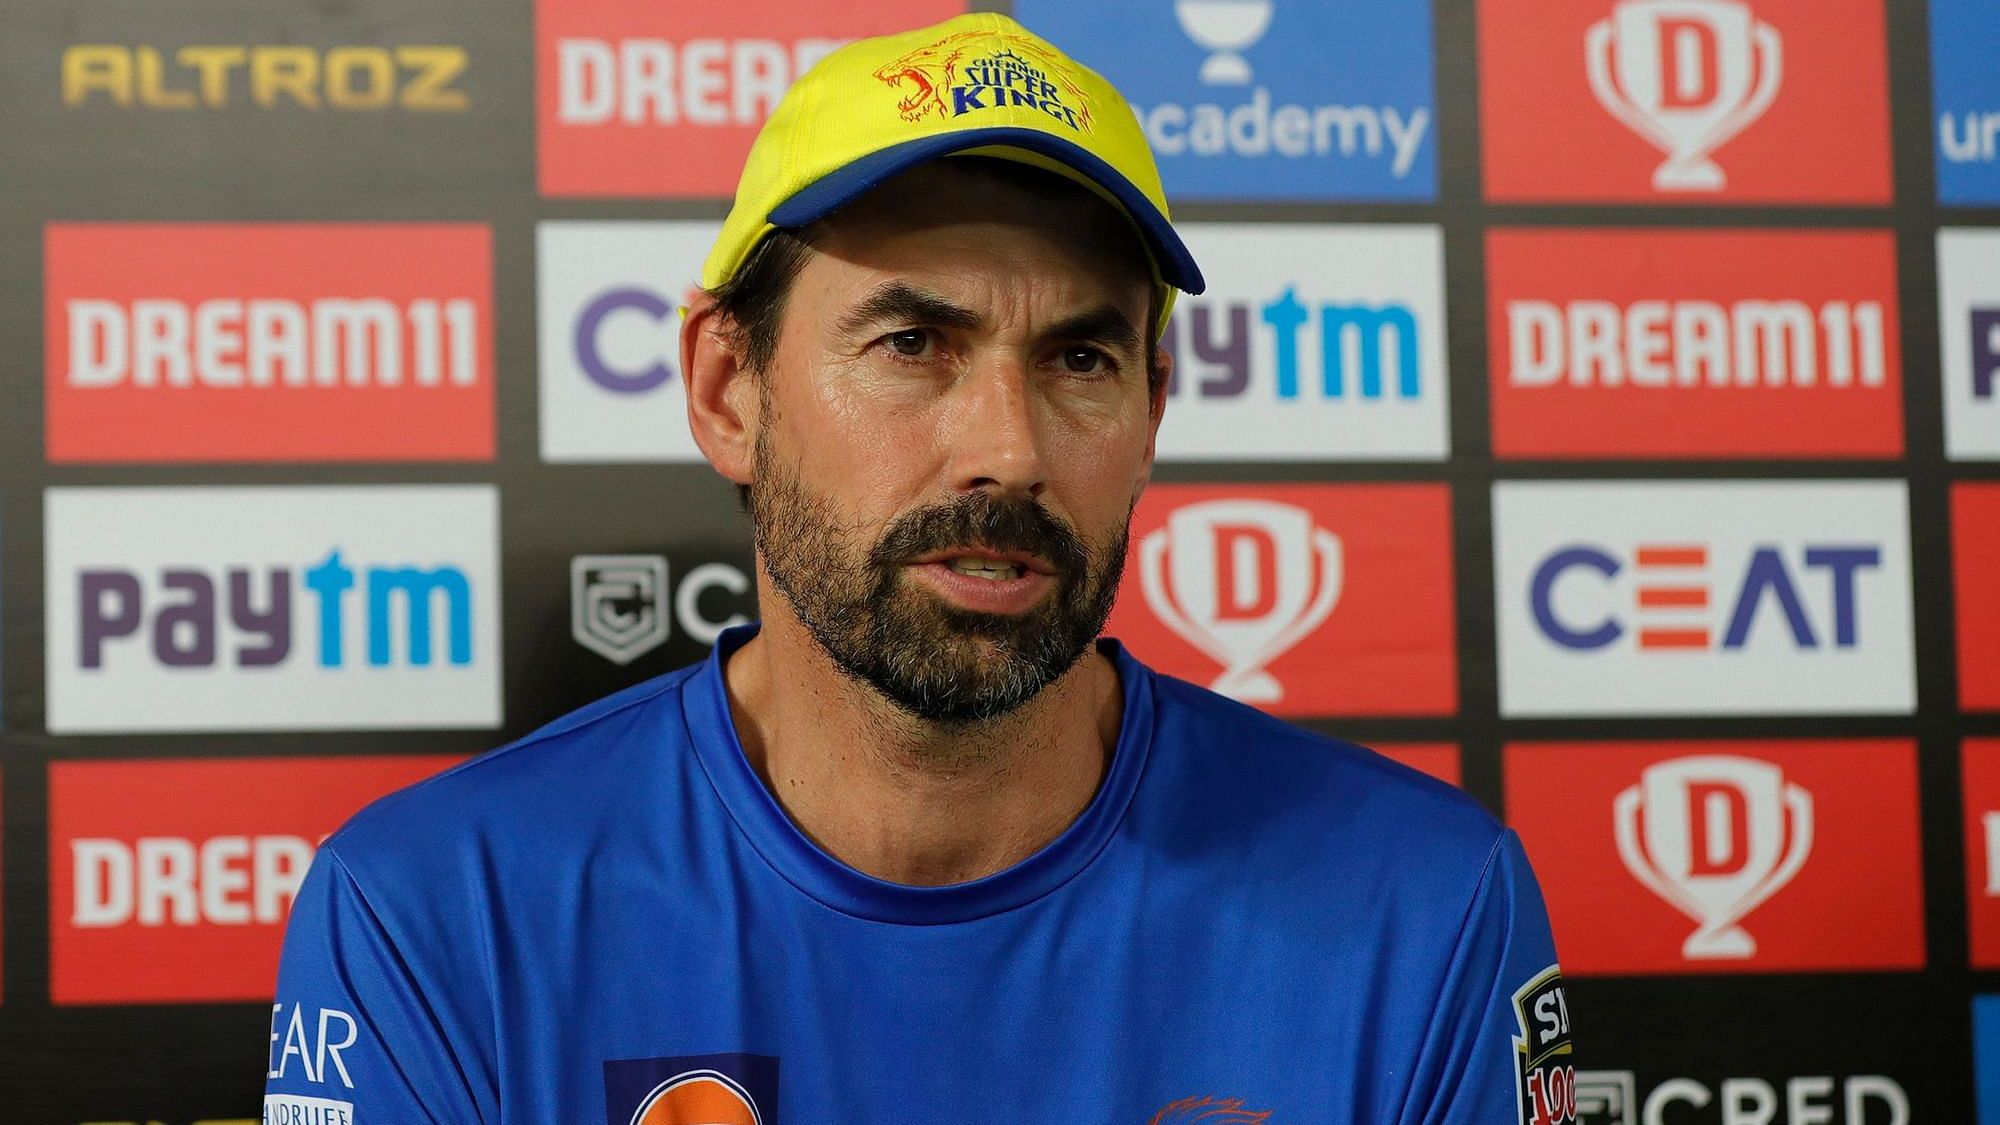 Chennai Super Kings coach Stephen Fleming said that top-order’s (lack of) form is a huge concern and needs to be addressed soon